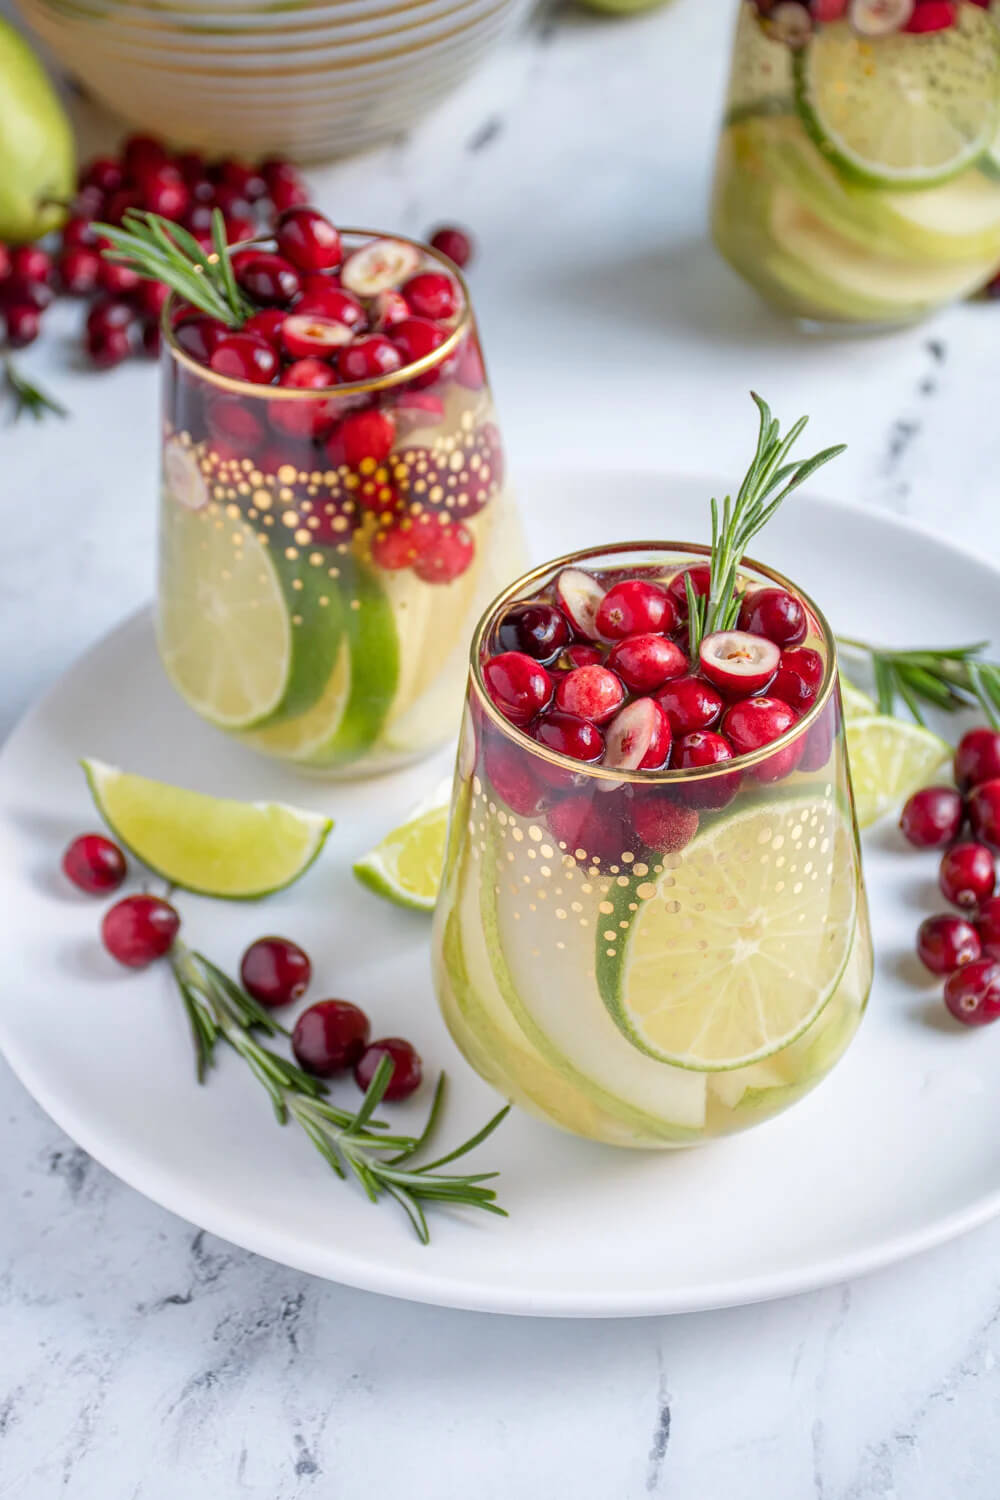 In 10 Christmas Beverages, this is White Christmas Sangria